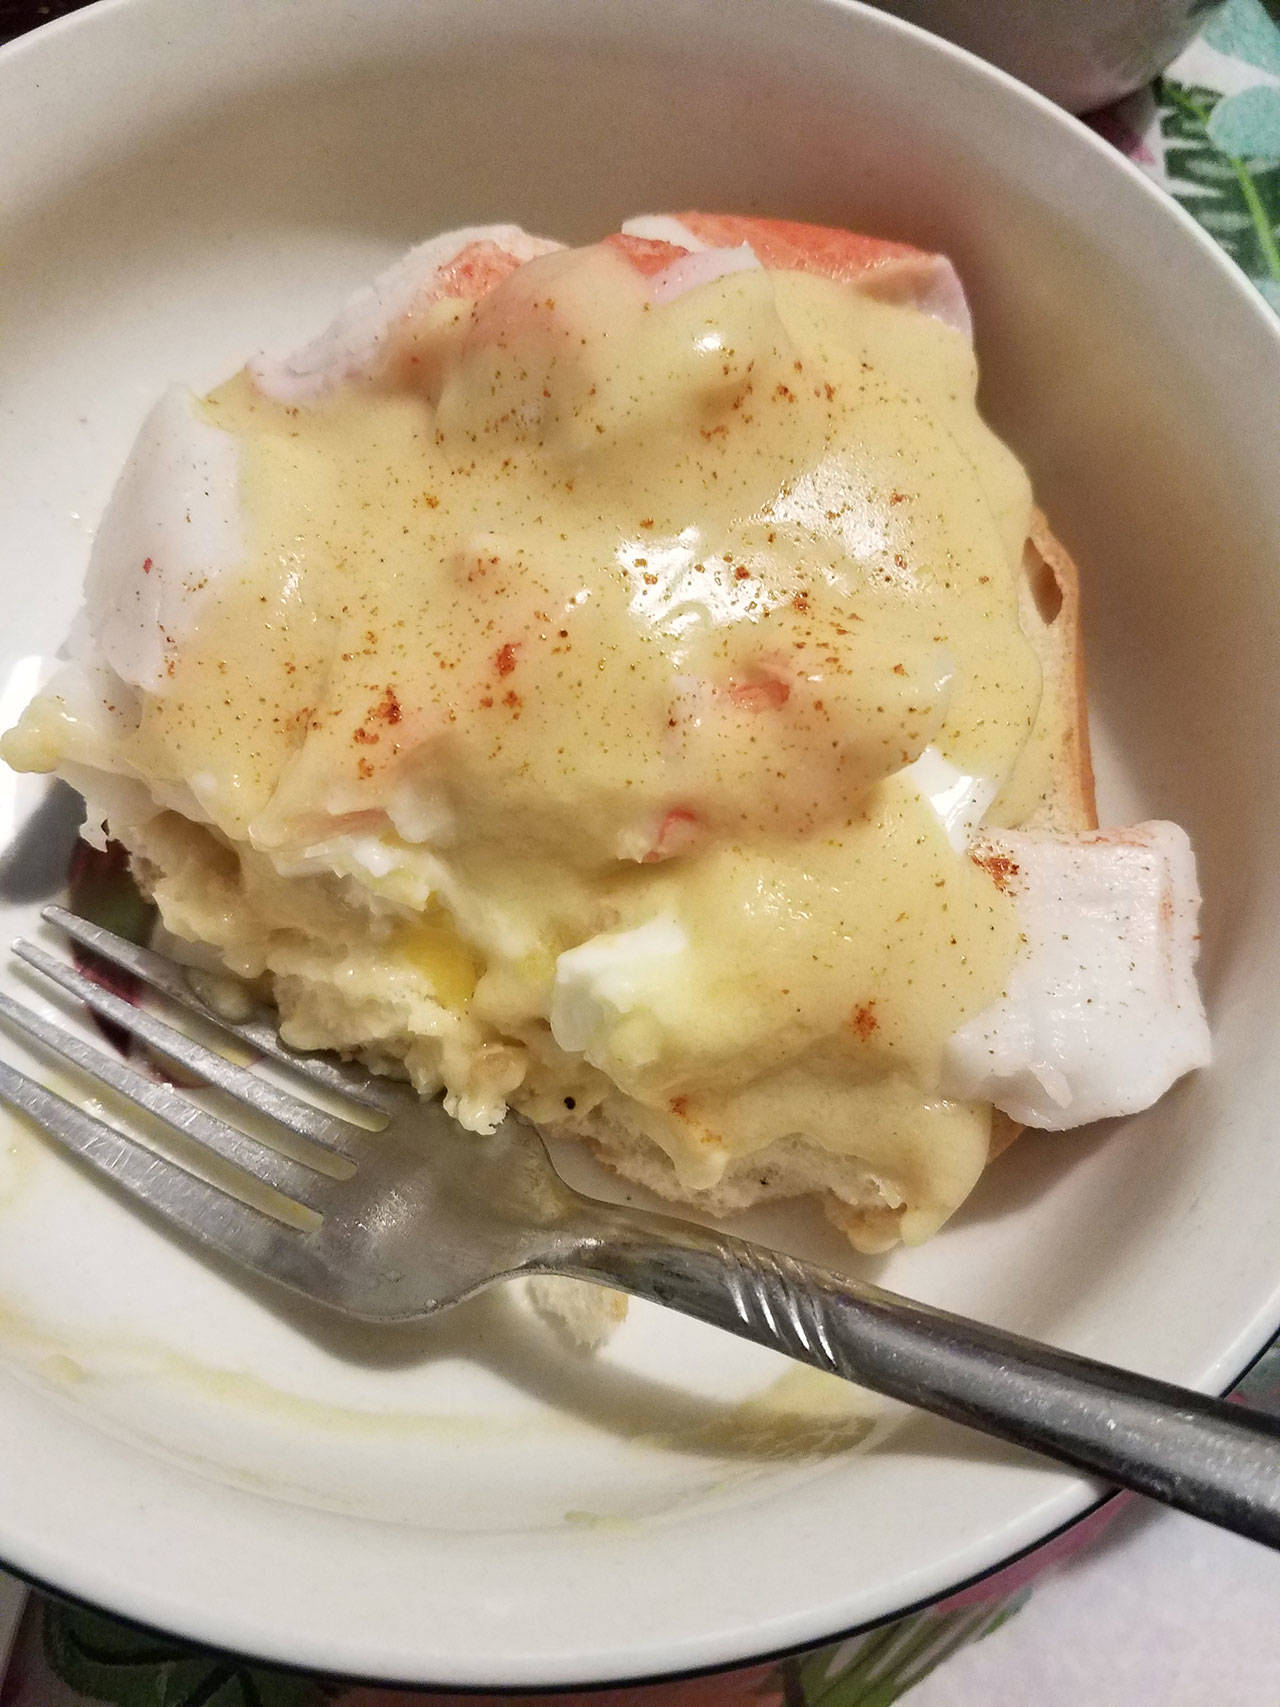 Homemade eggs Benedict, with a few modifications, is ready to eat. (Emily Hanson/Peninsula Daily News)